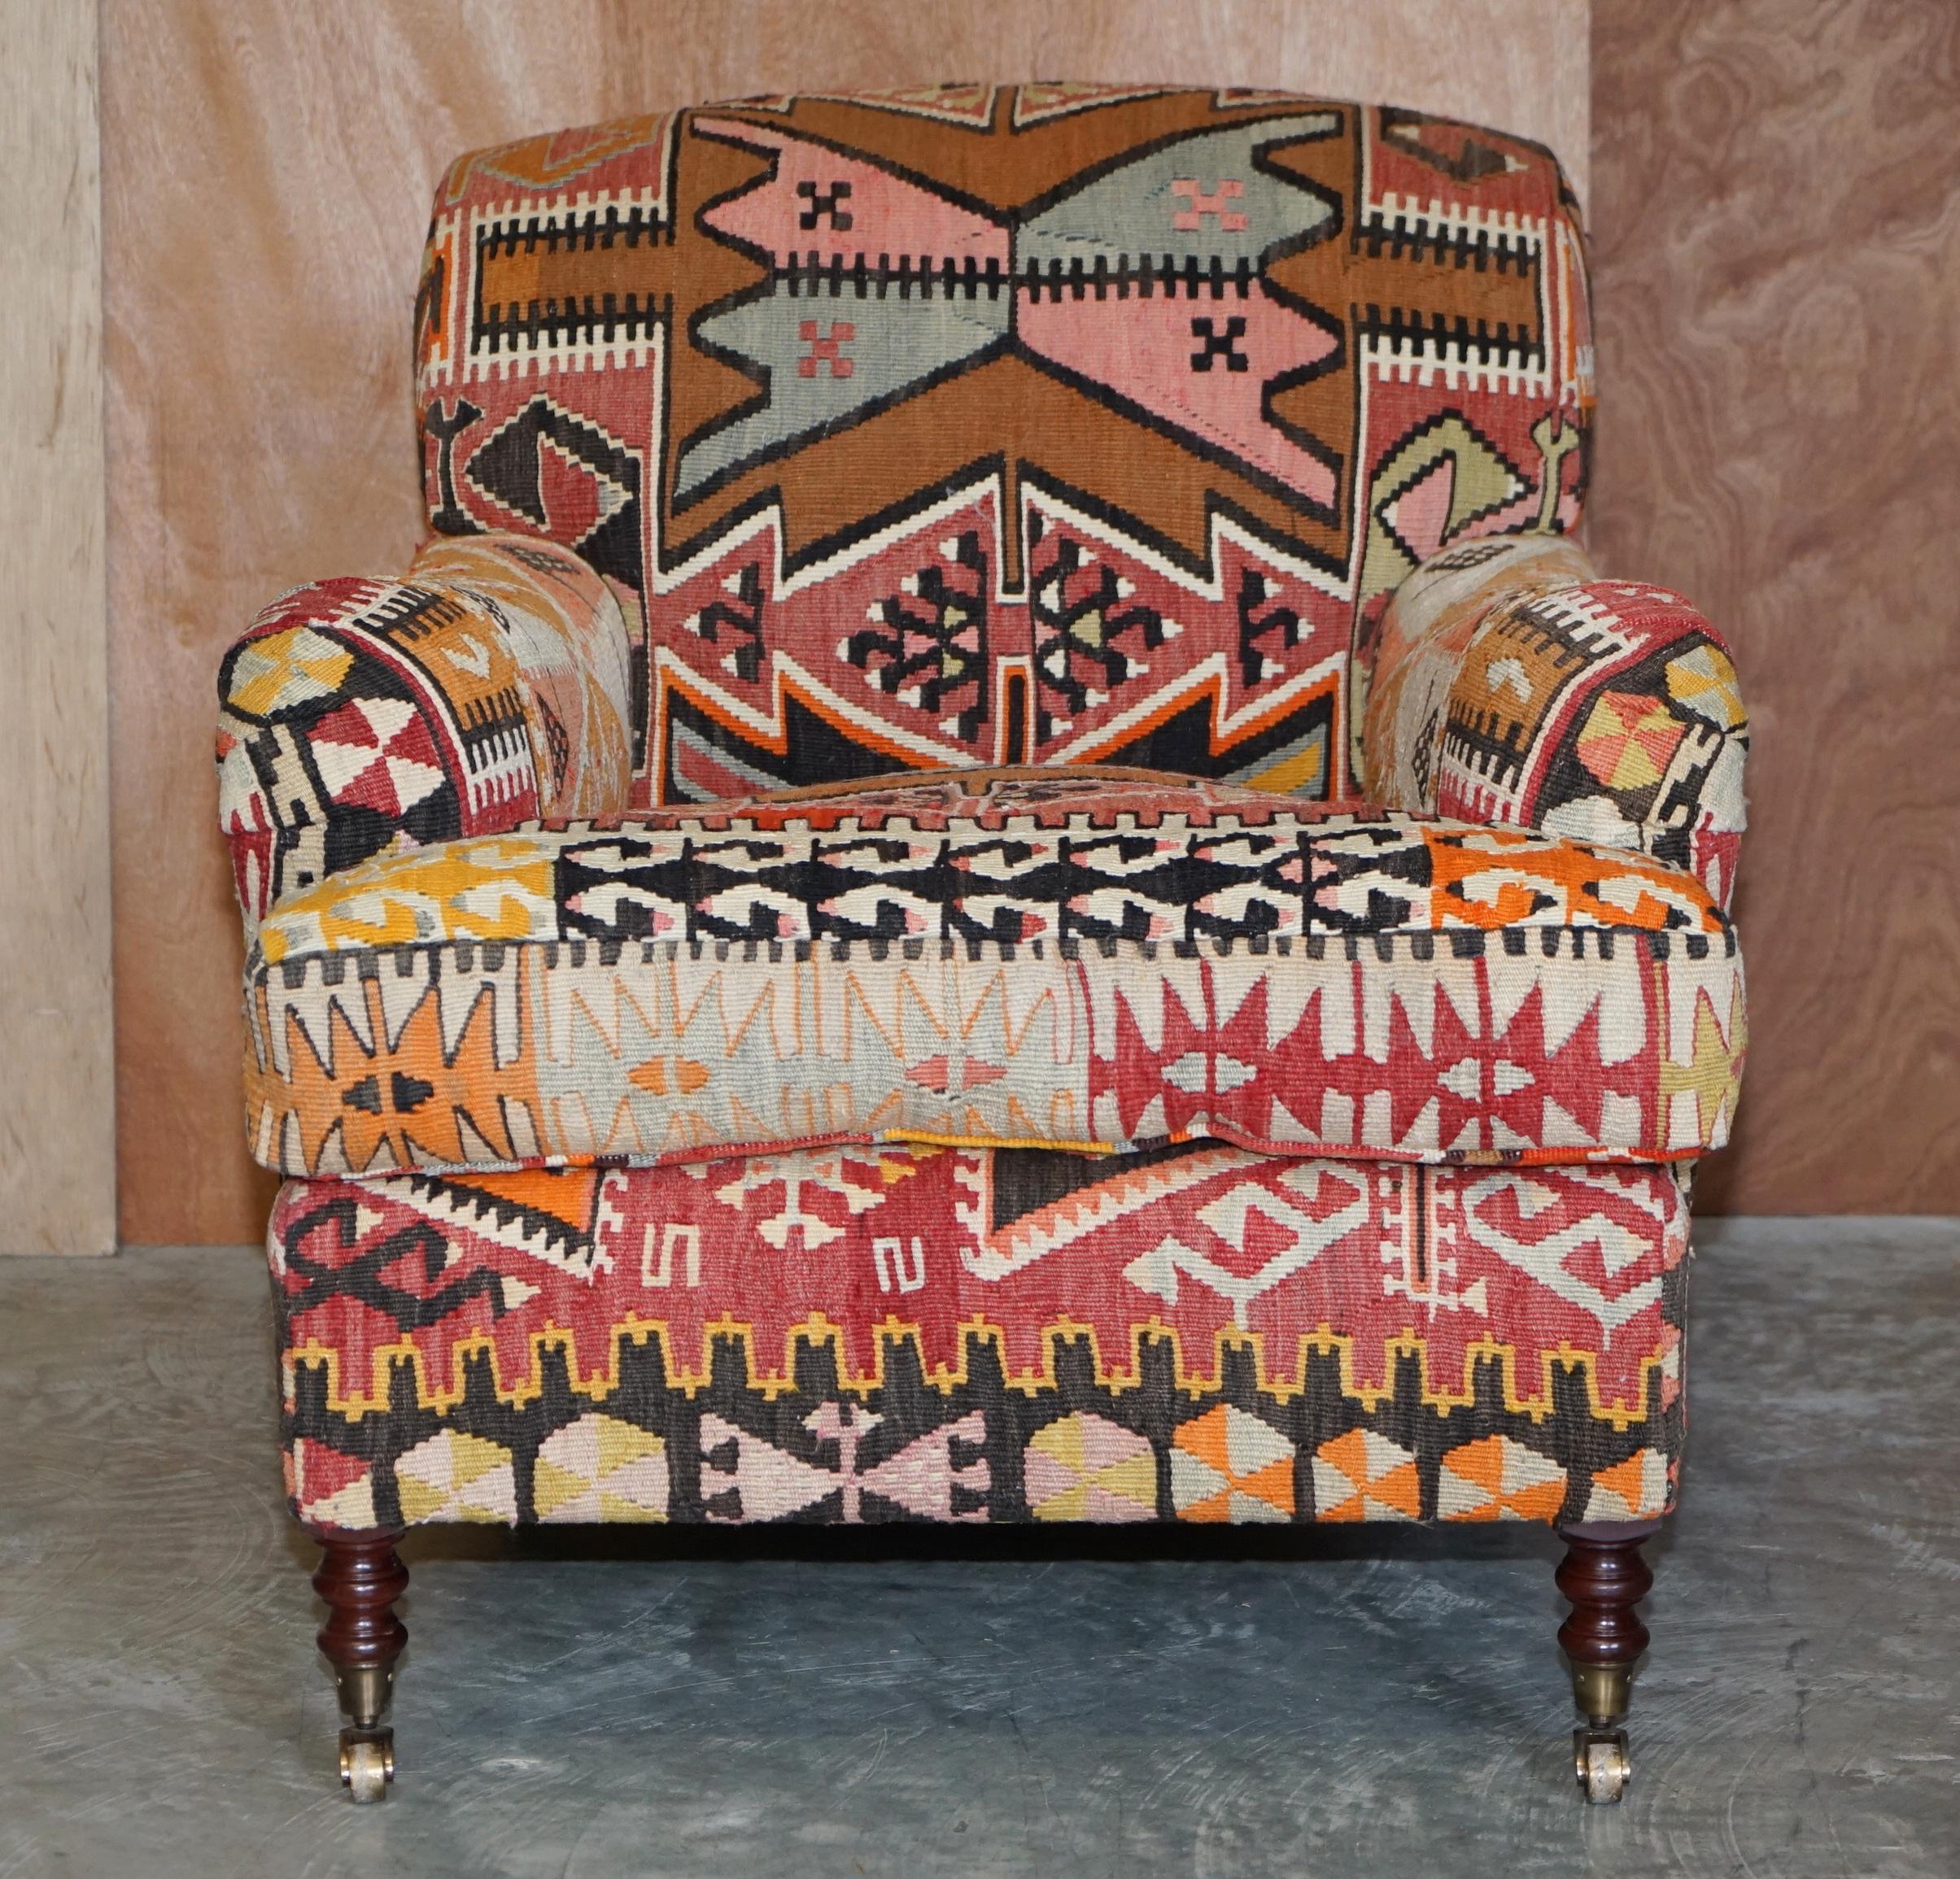 We are delighted to offer this sublime and highly collectable (part of a suite) new old stock George Smith Signature Scroll Arm Aztec Kilim armchair with oversized feather filled cushion. 

This chair is as mentioned part of a suite, I have two of